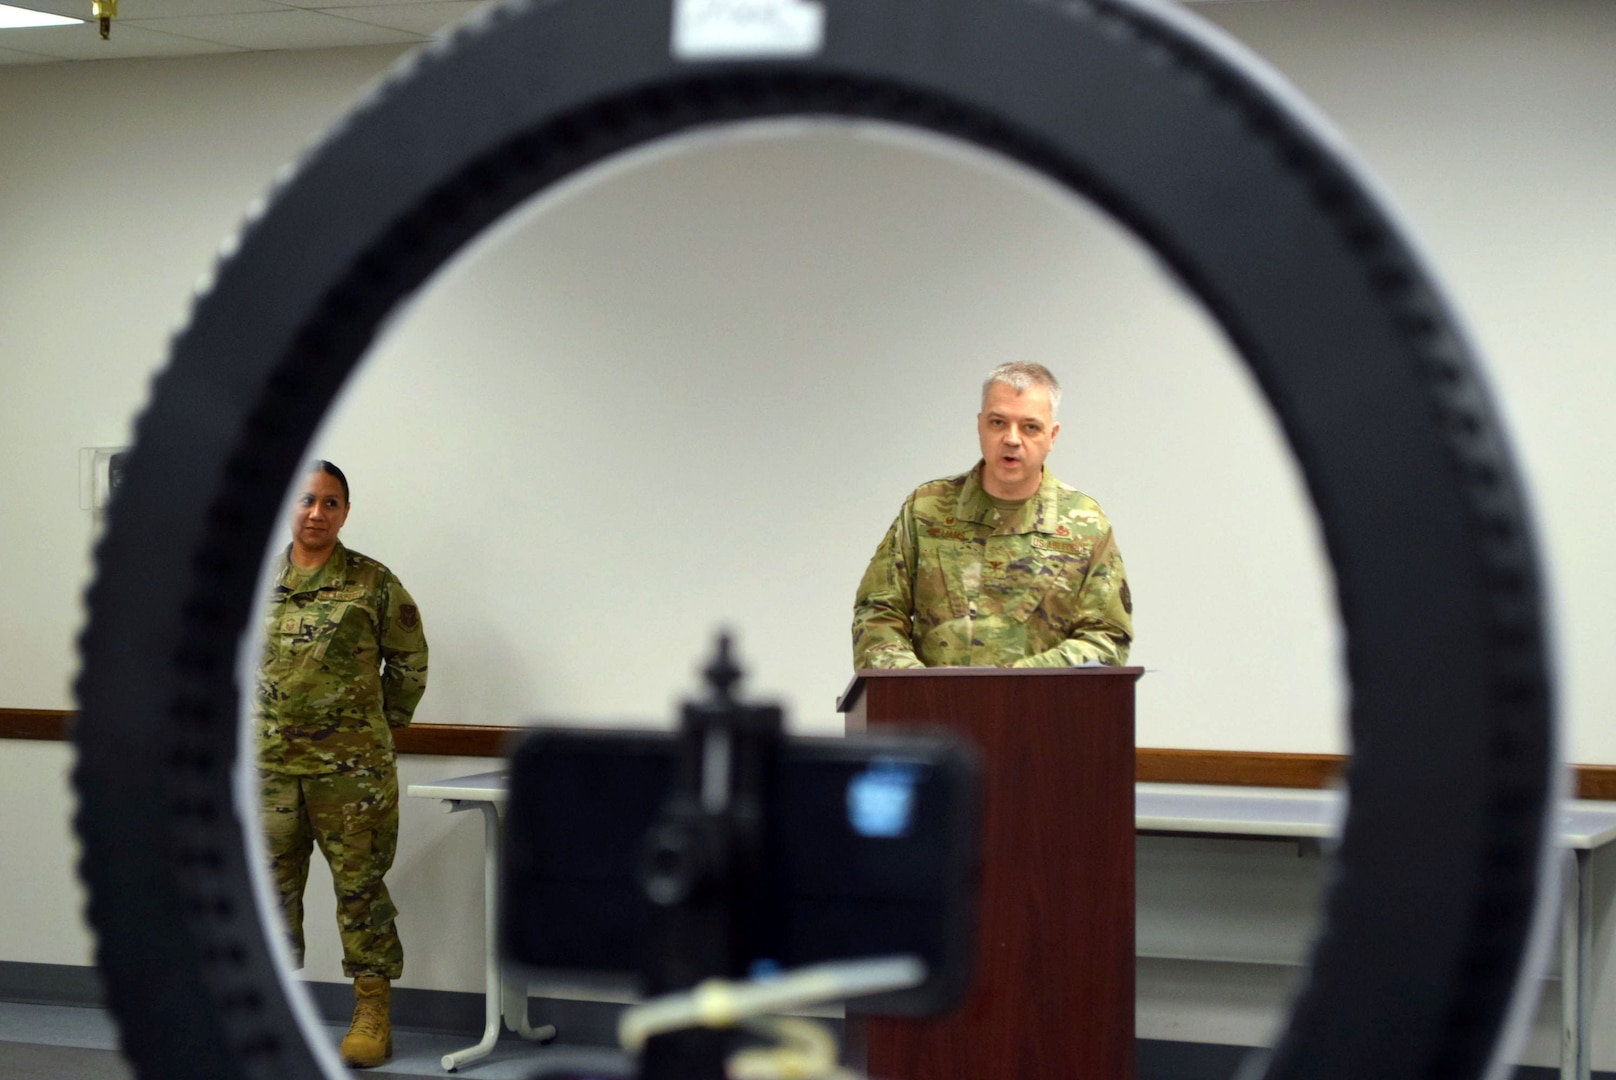 Col. Wayne M. Williams, 433rd Mission Support Group commander, delivers his remarks during a change of command ceremony at Joint Base San Antonio-Lackland, Texas, June 6, 2020.